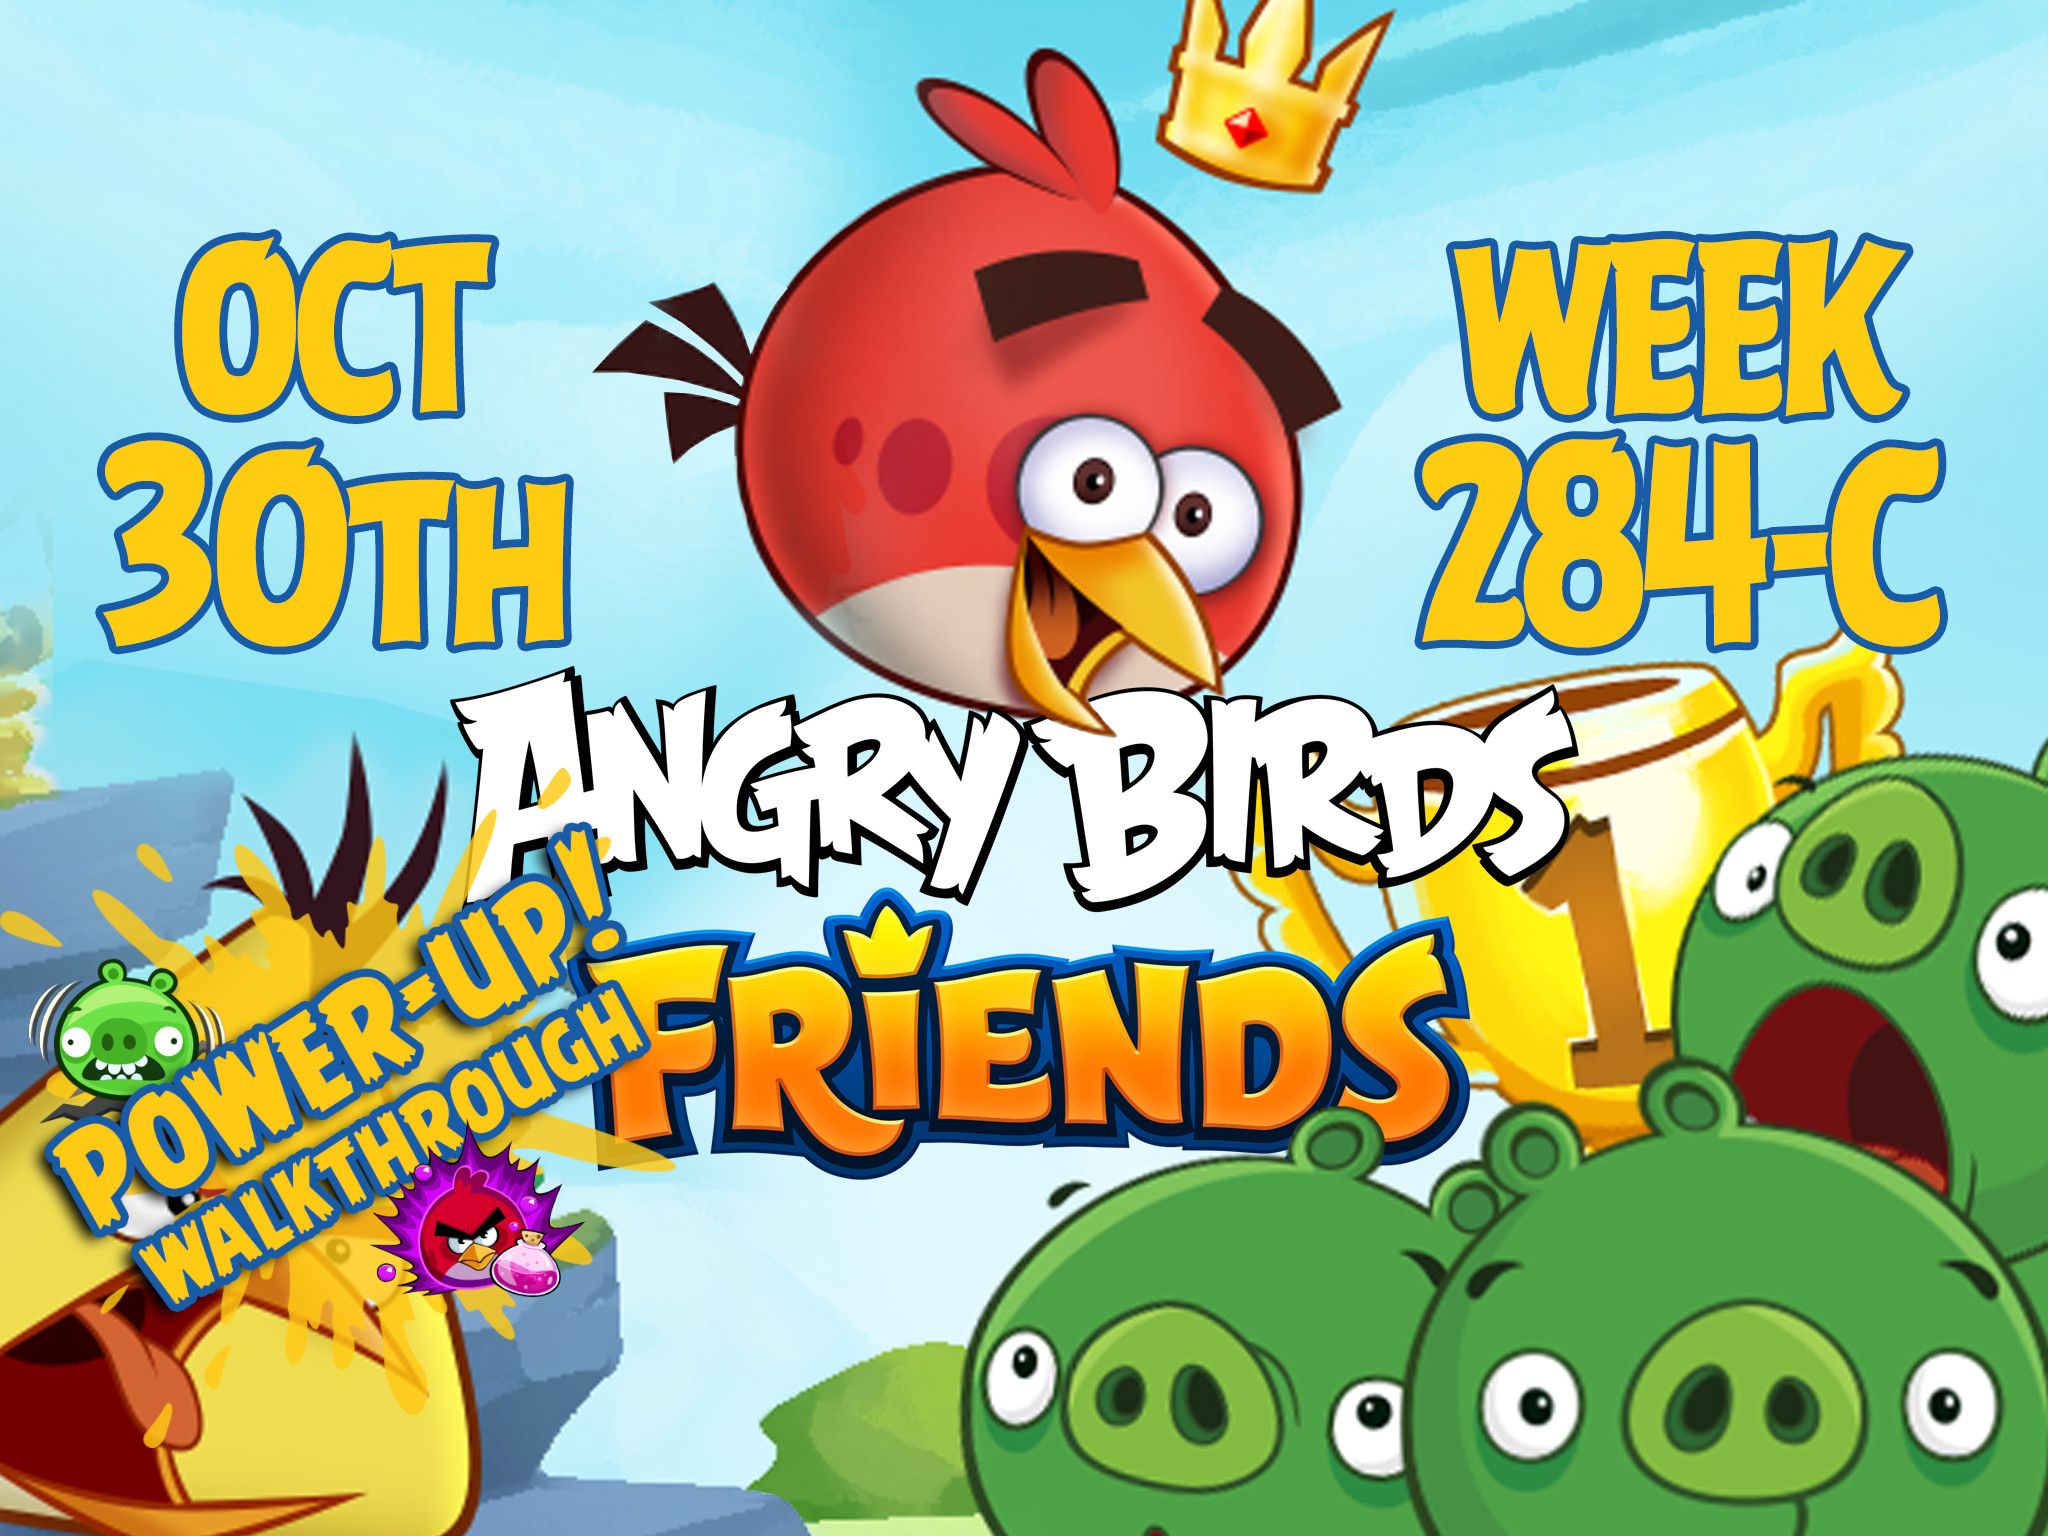 Angry Birds Friends Tournament Week 284-C Feature Image PU